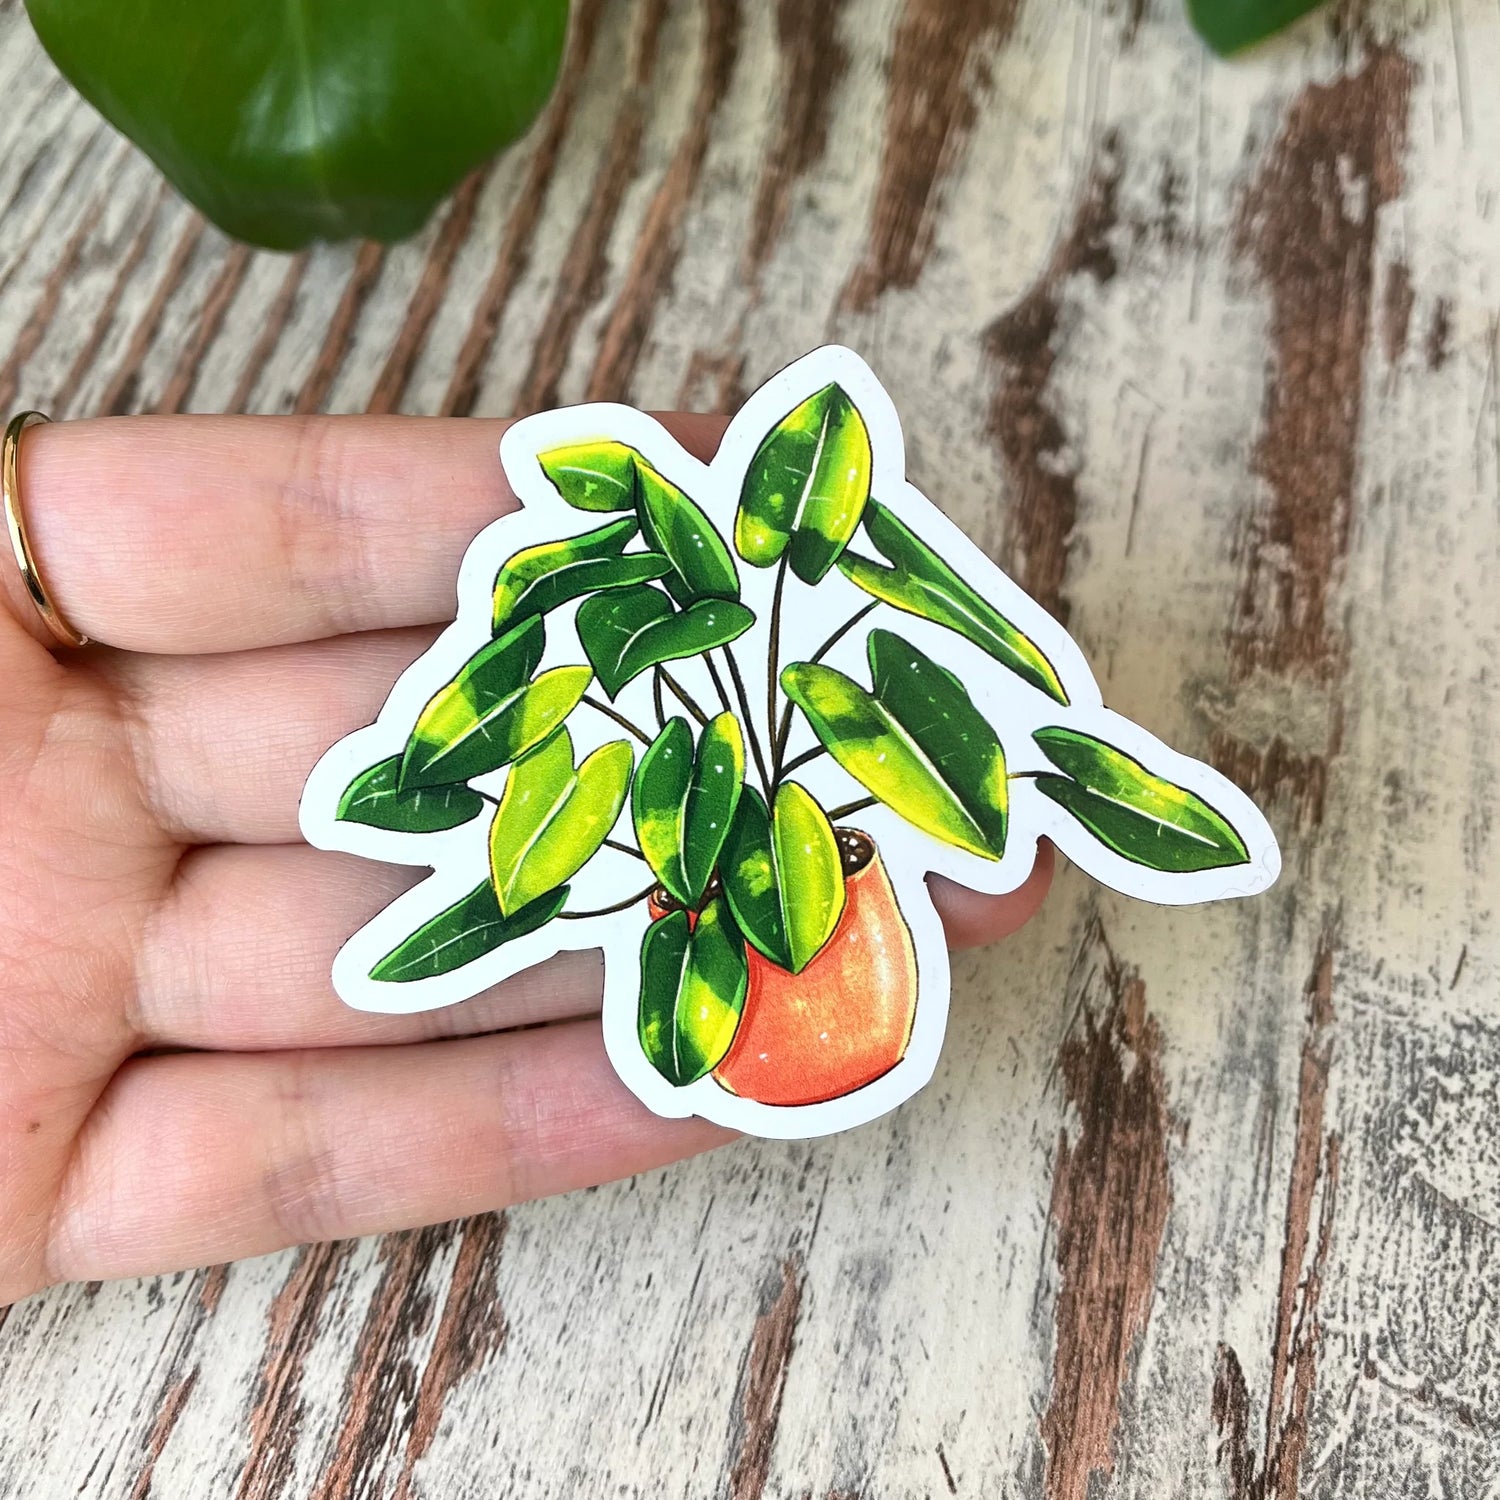 Philodendron burle marx Magnet